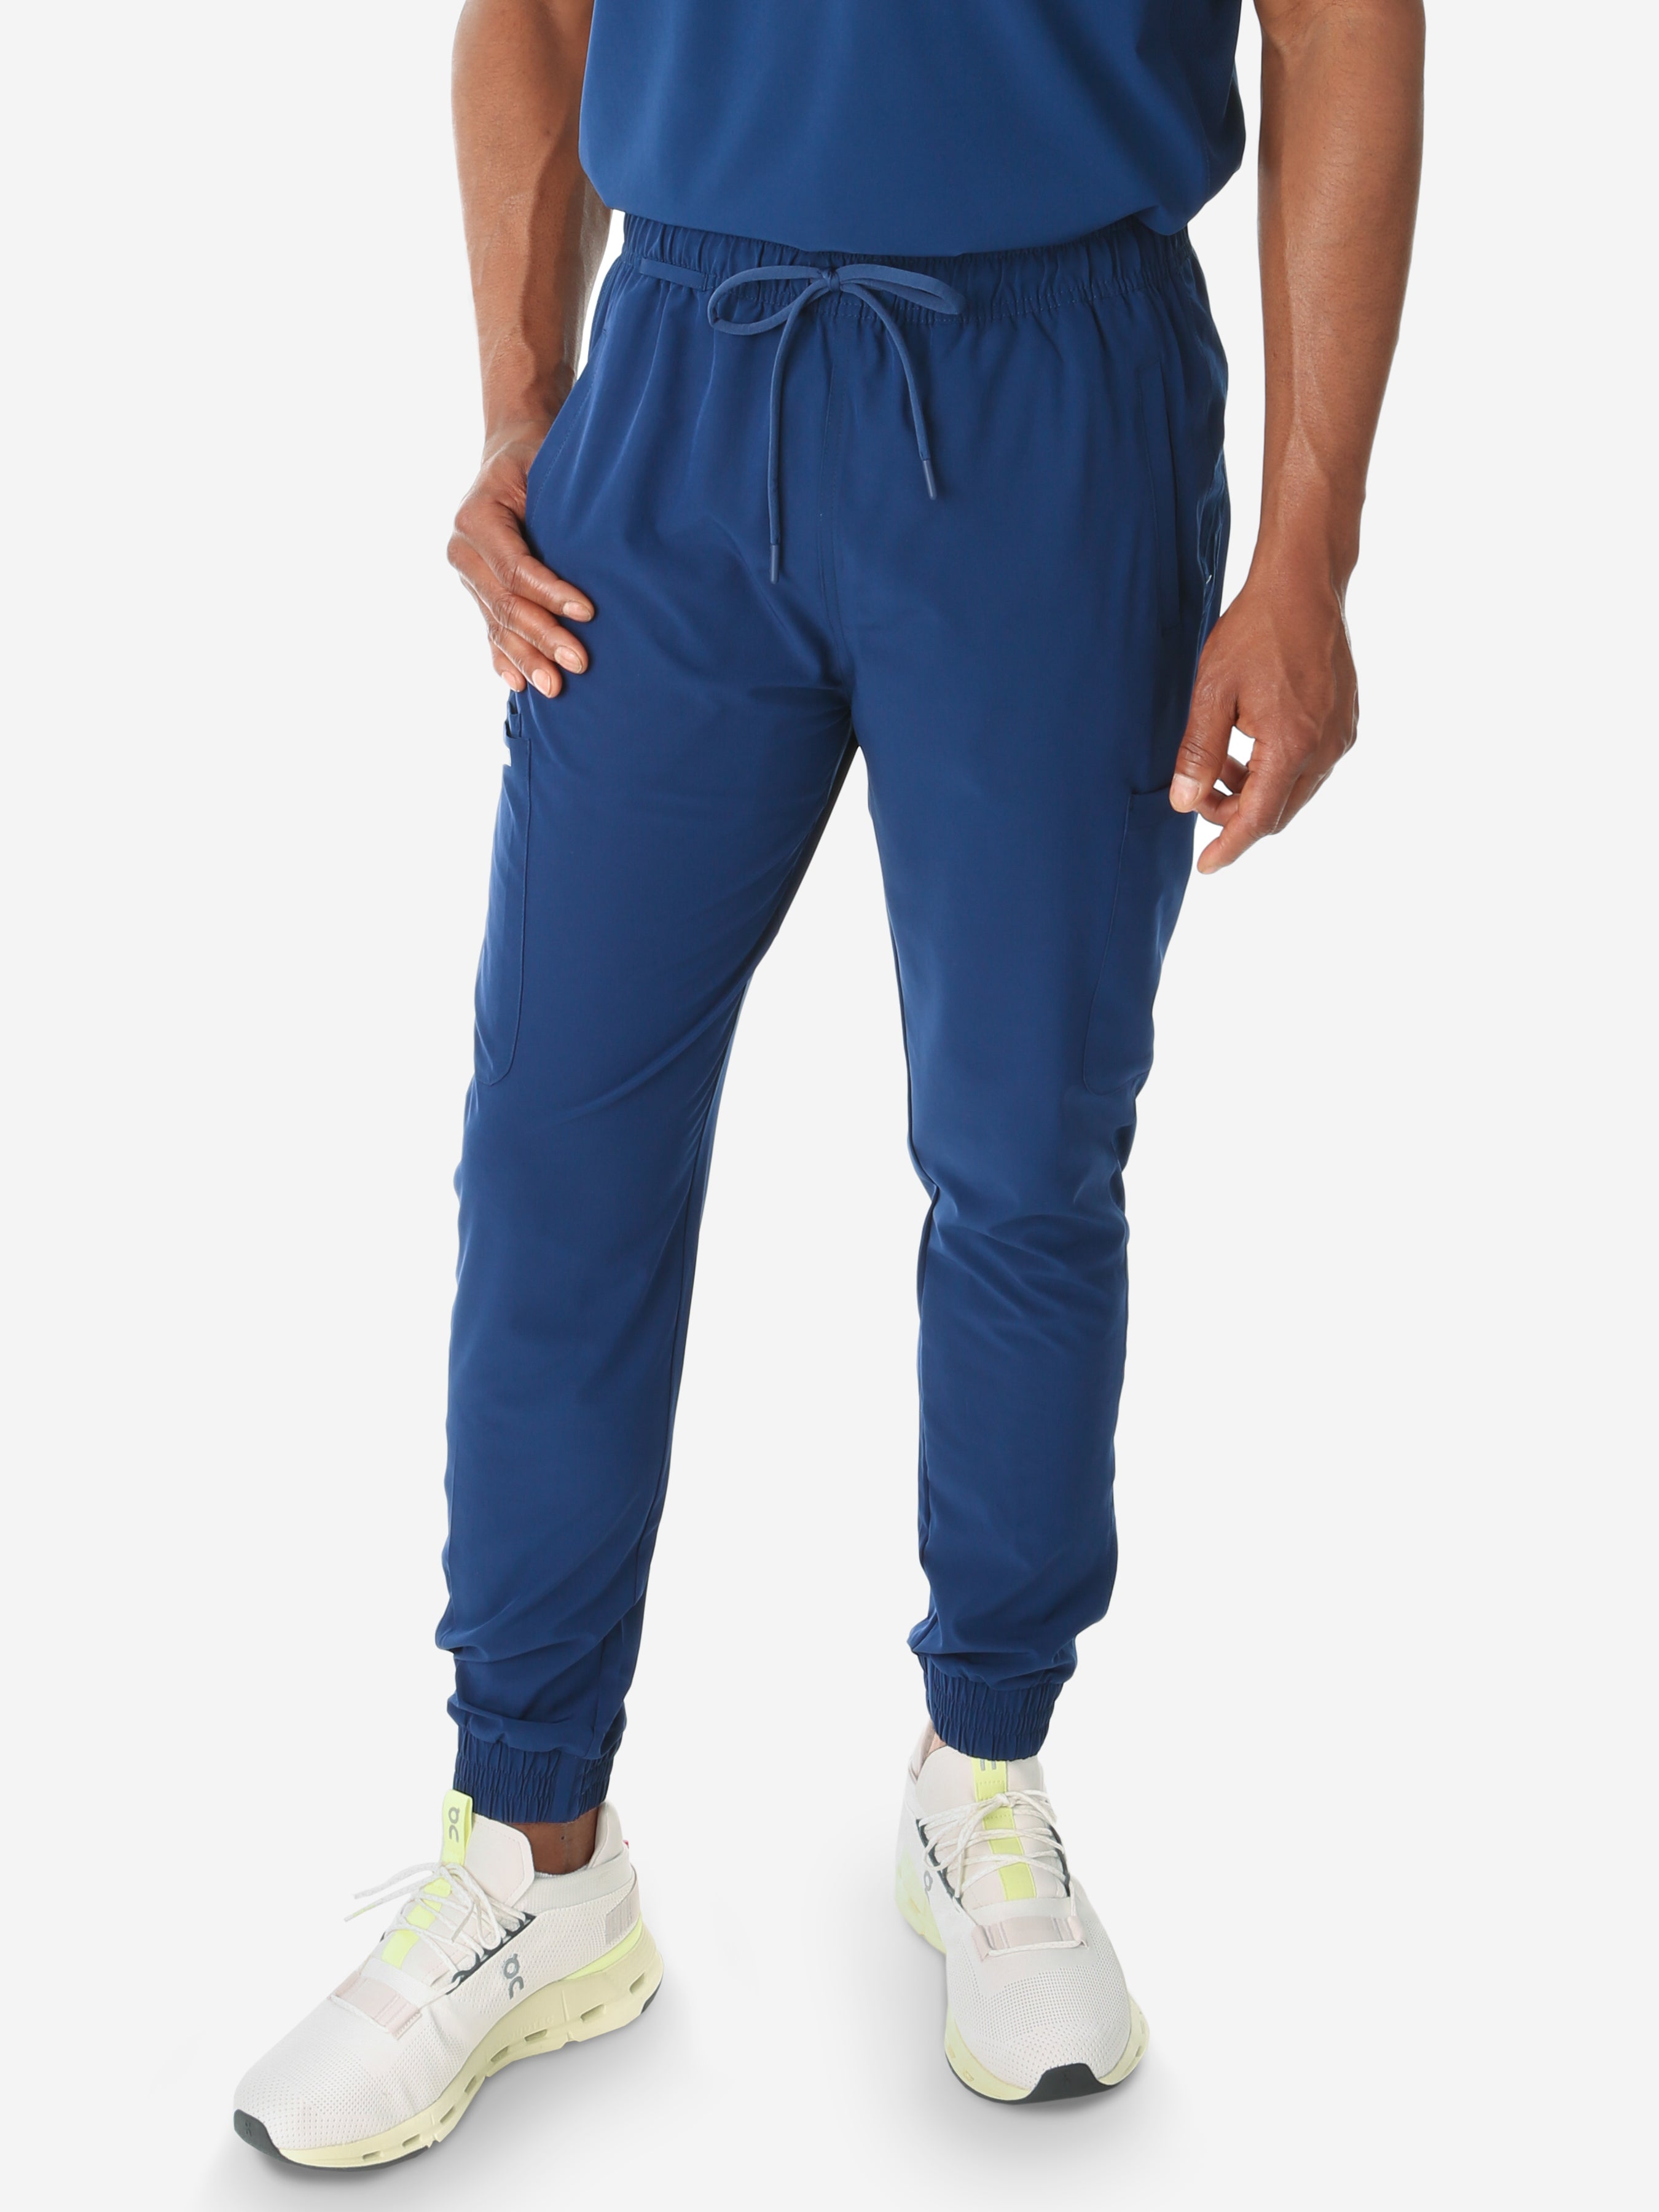  MediChic Men's Scrubs Joggers Pants with 6 Pockets and